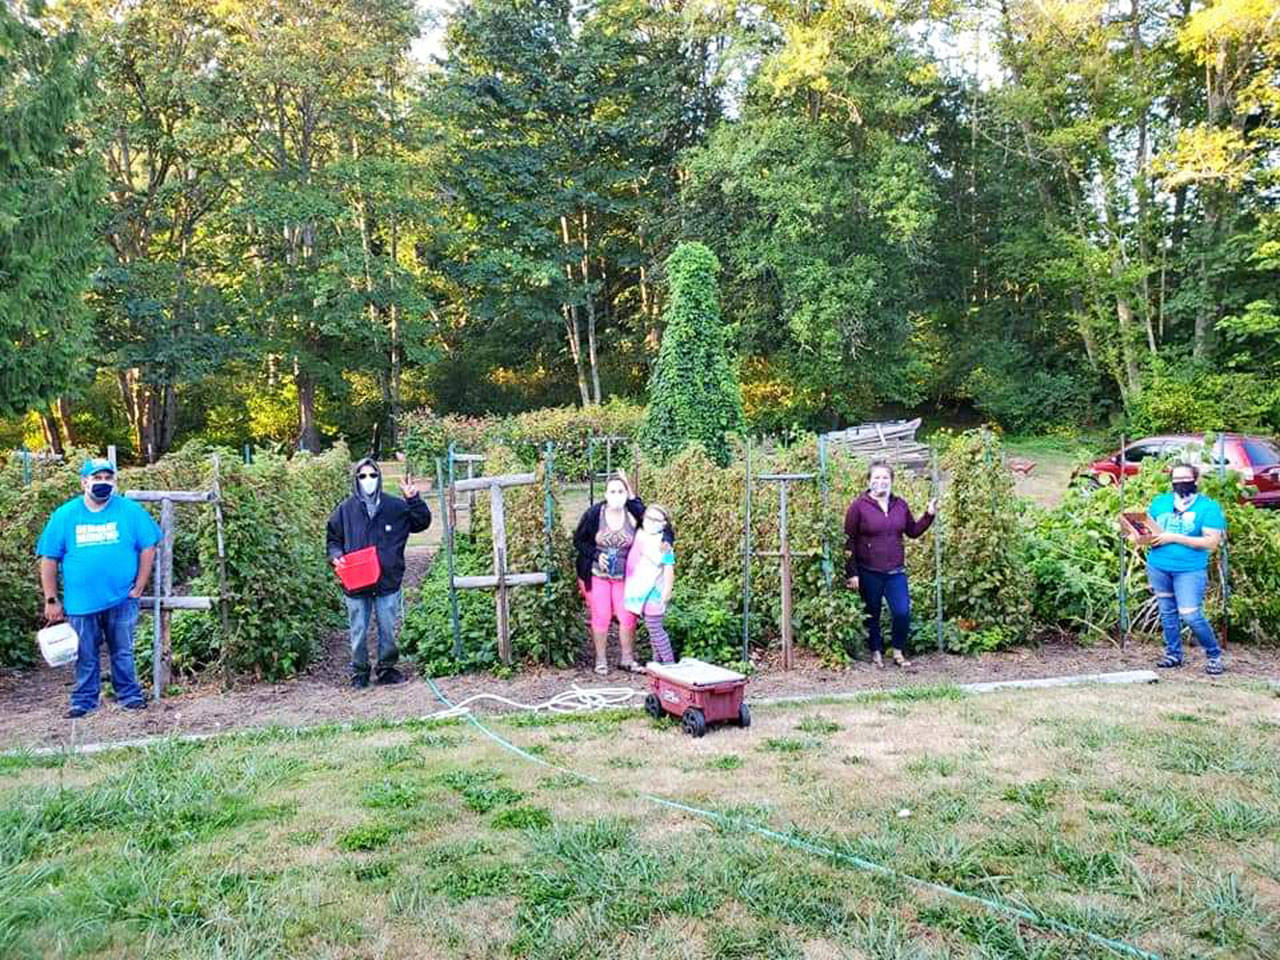 The WSU Extension Gleaning Program is seeking local fruit and vegetables not being collected by property owners. Each year, gleaners rescue tens of thousands of pounds of produce that would otherwise go to waste, program organizers say. Photo courtesy of WSU Extension Gleaning Program